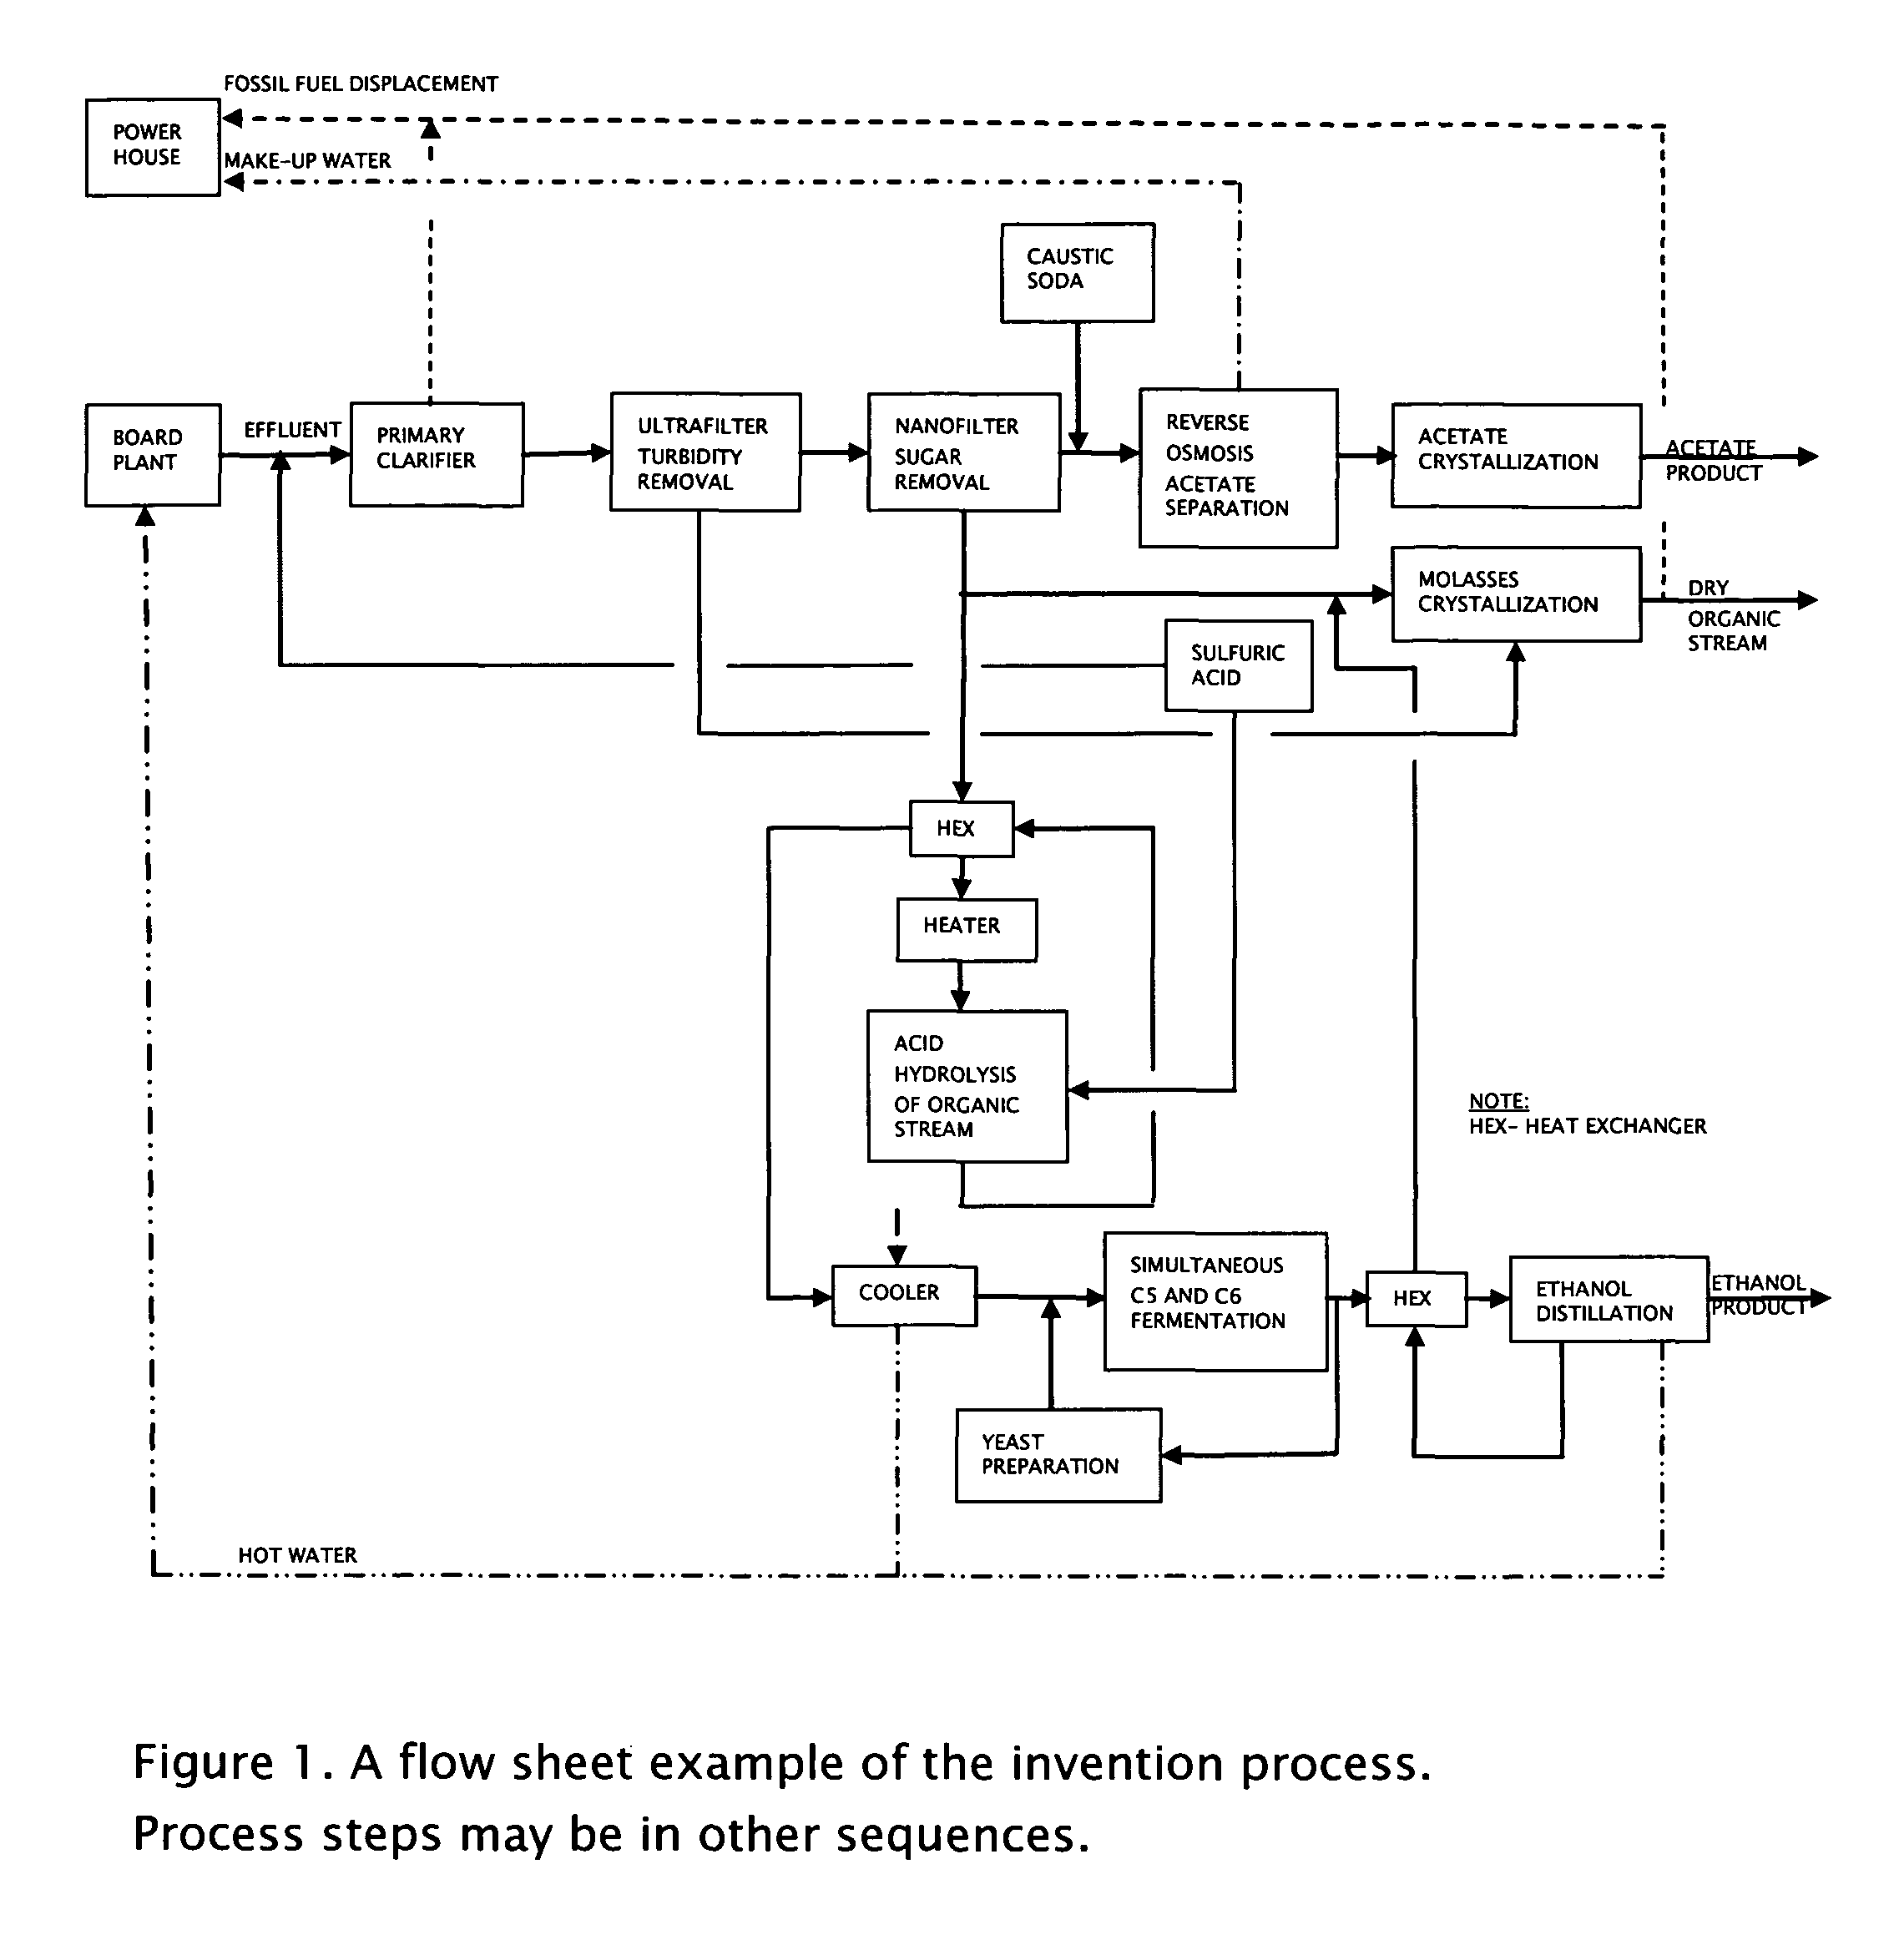 Process for obtaining biochemicals in a zero-liquid discharge plant